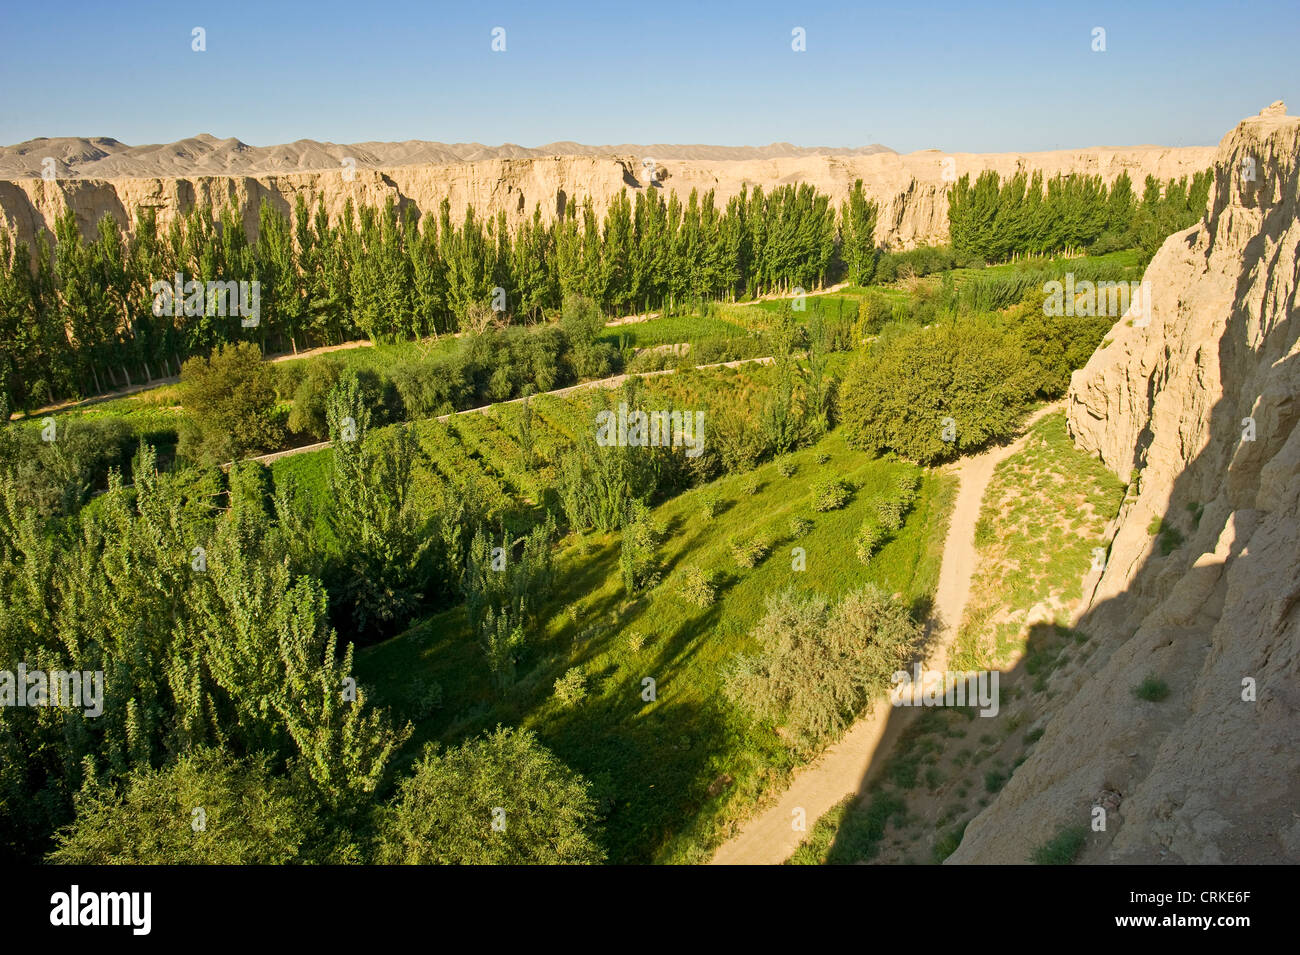 Grape valley area of Turpan and known for its high quality produce. Stock Photo